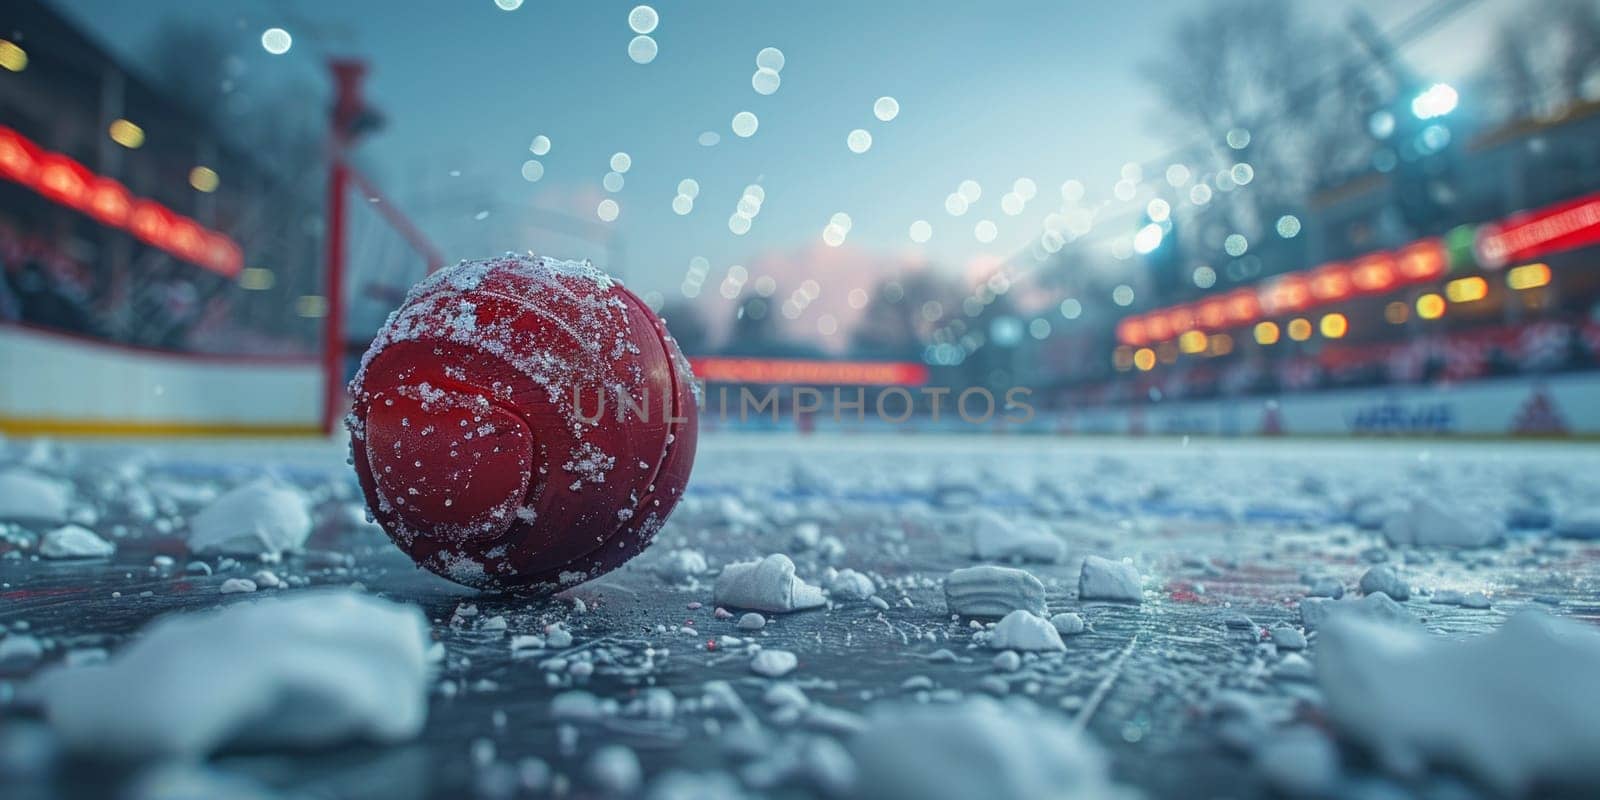 A vibrant red ball, resembling a hockey puck, peacefully sits atop a serene blanket of snow on the ground.